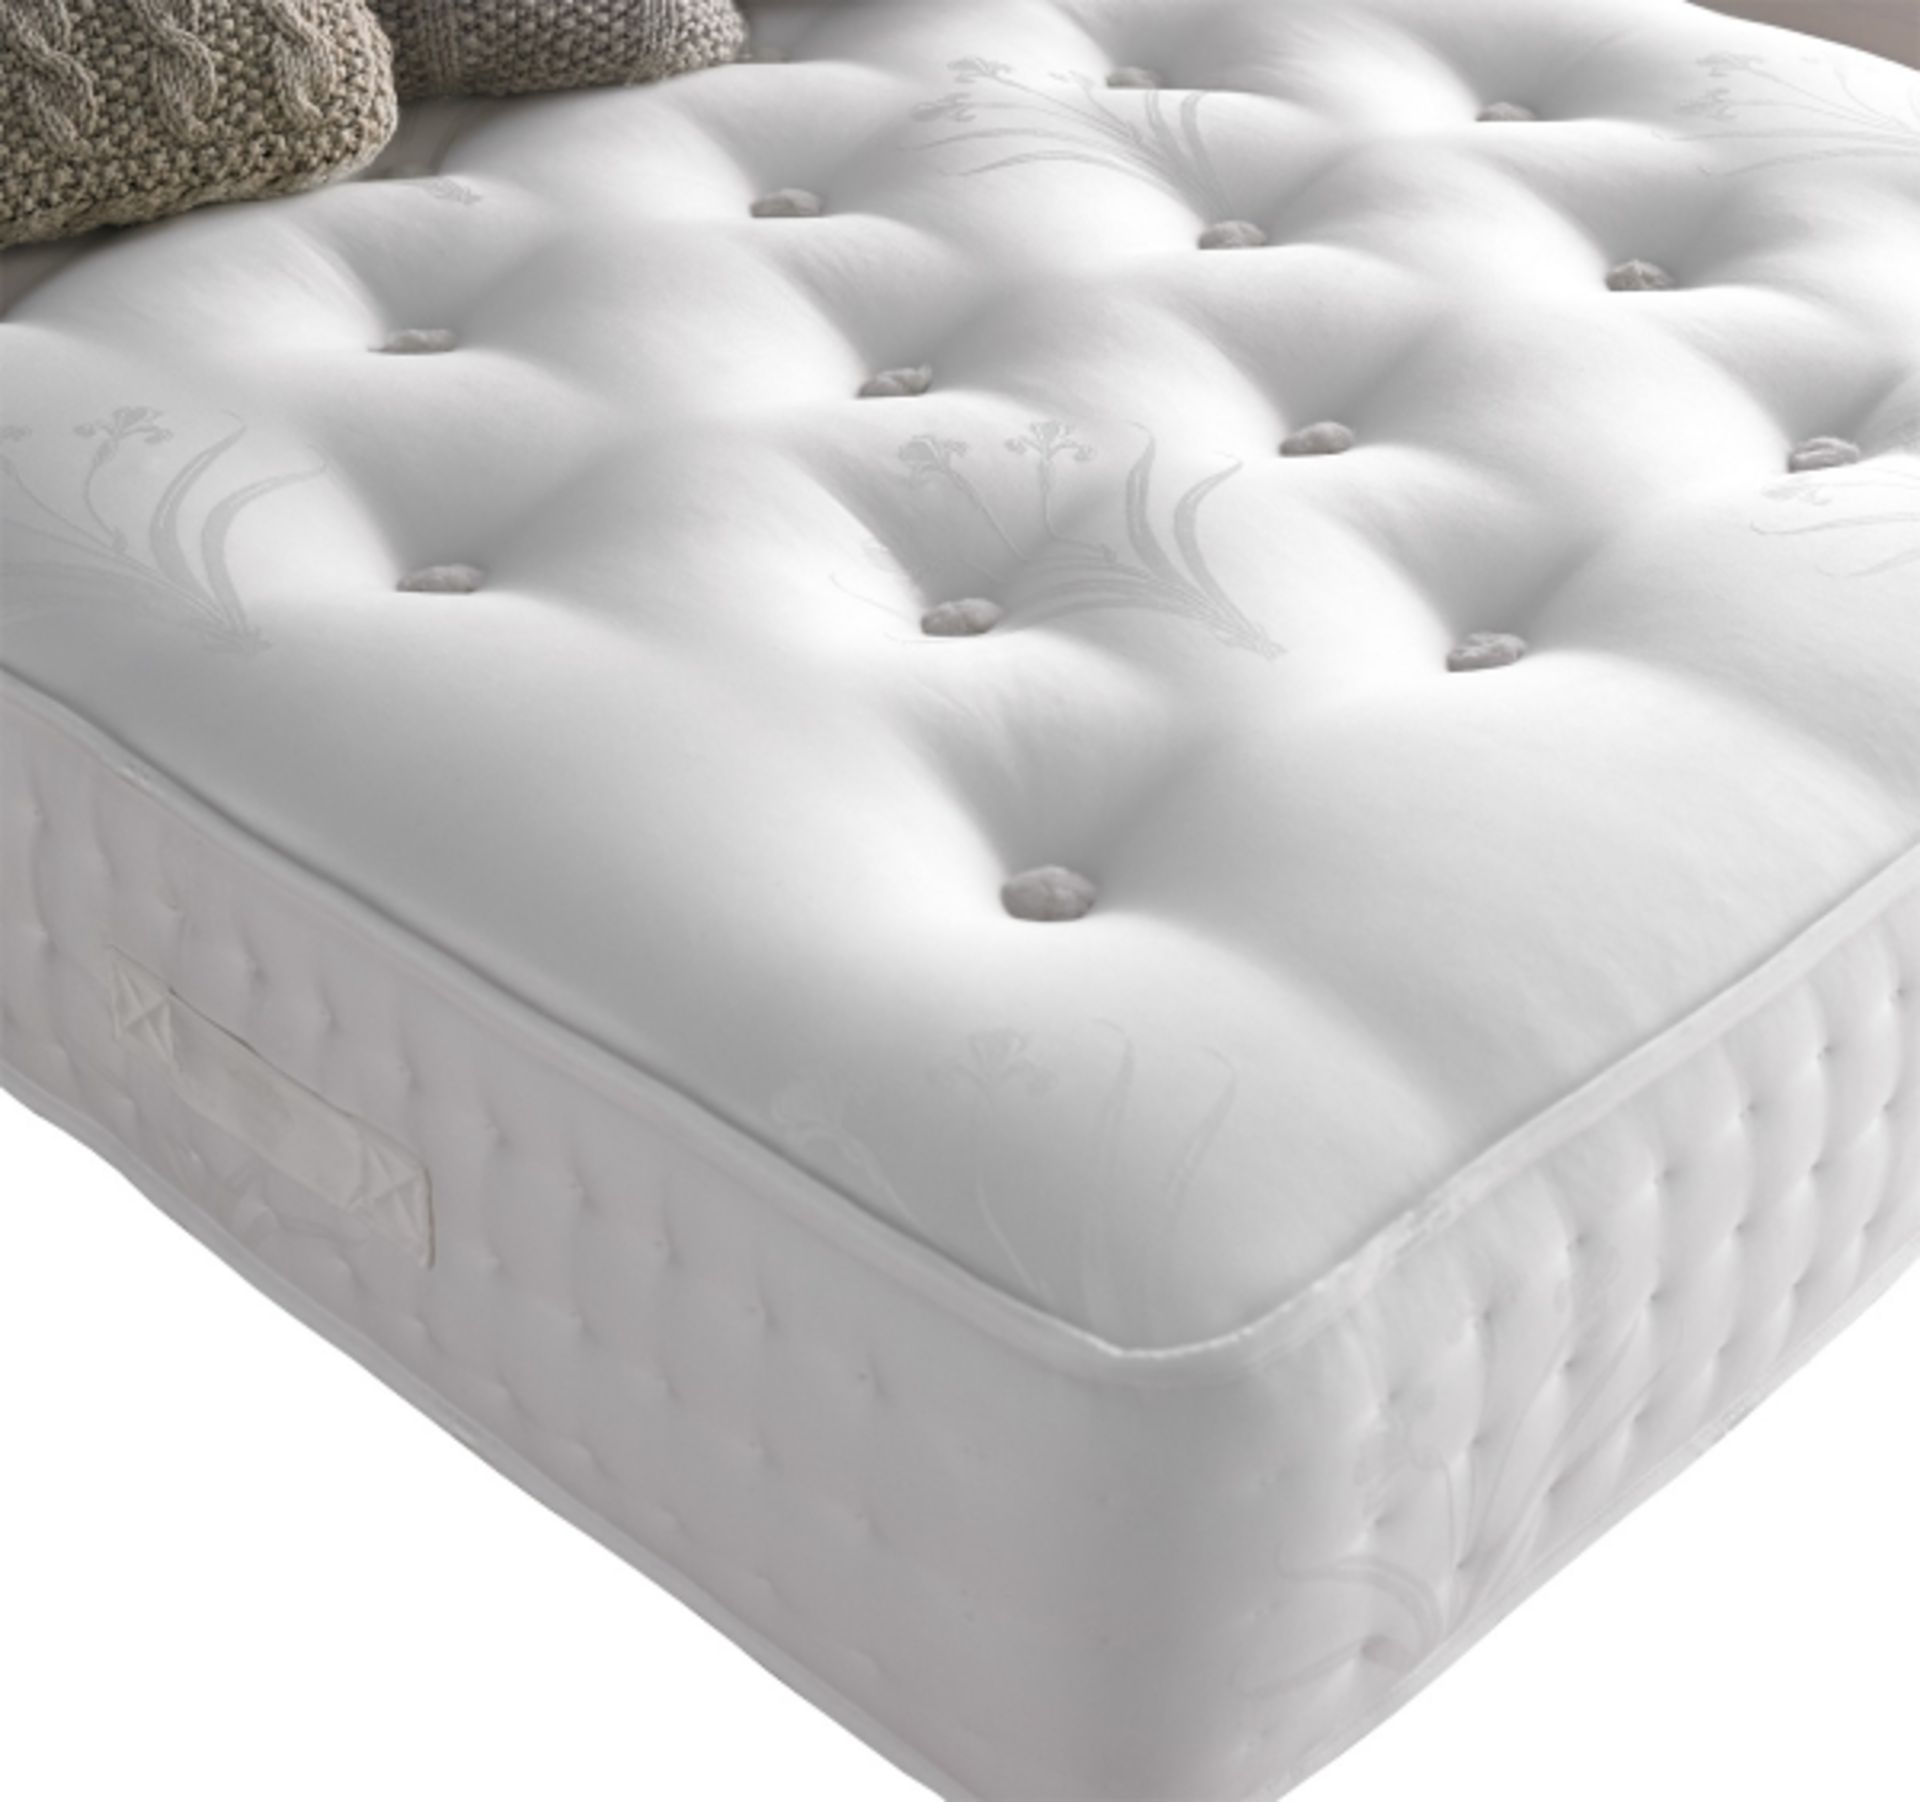 1 BRAND NEW 4FT6 DOUBLE GILTEDGE BEDS BACKCARE 2000 SUPREME MATTRESS / RRP £409.00 (VIEWING HIGHLY